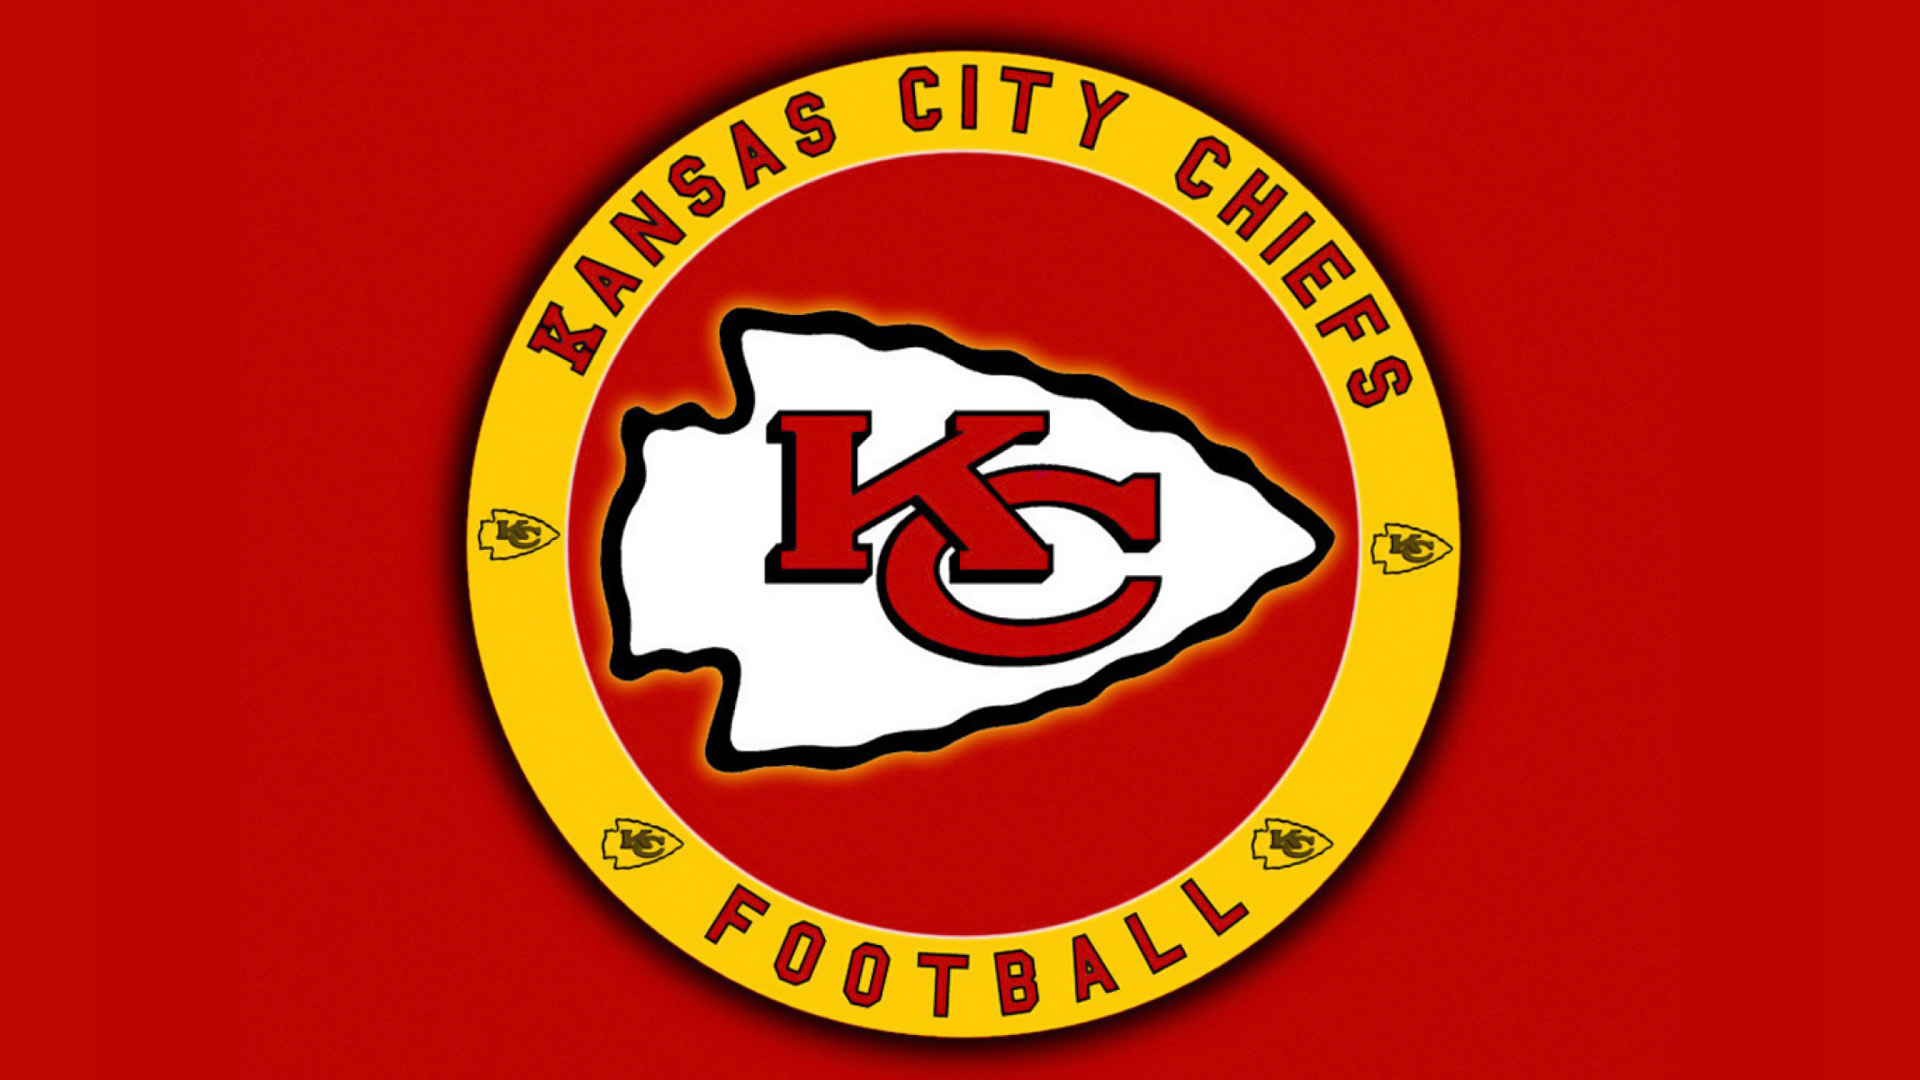 Kansas City Chiefs Wallpapers For Desktop and PC  Cool Kansas City Chiefs  Wallpapers for Mobile iPhone  Android  FancyOdds